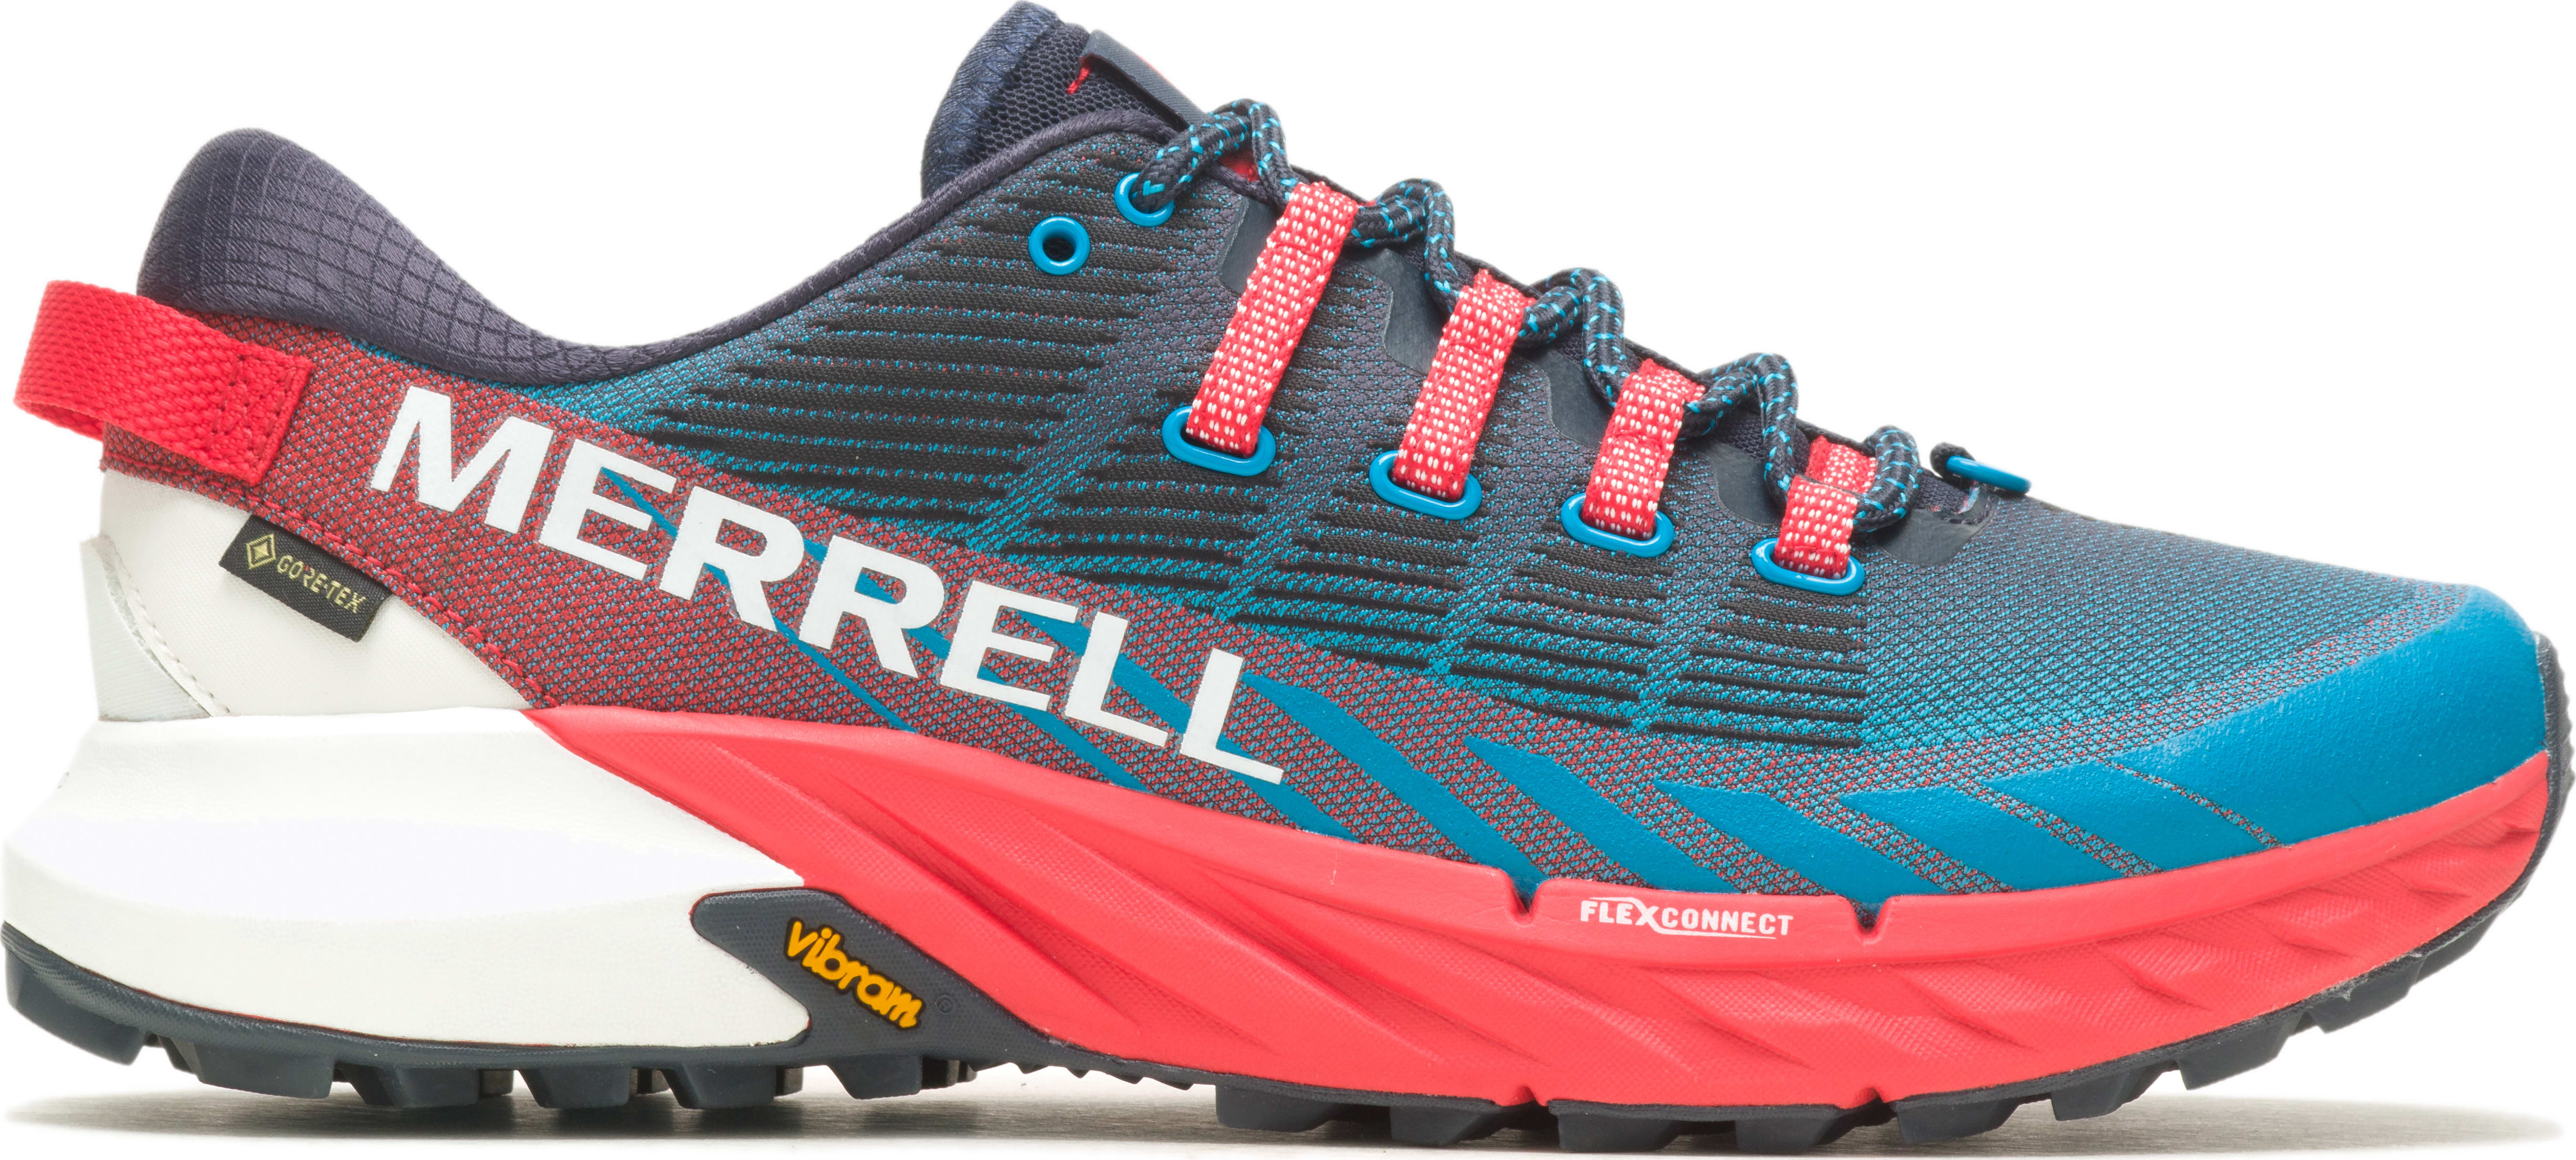 Buy Merrell Men's Agility Peak 4 Gore-Tex from Outnorth